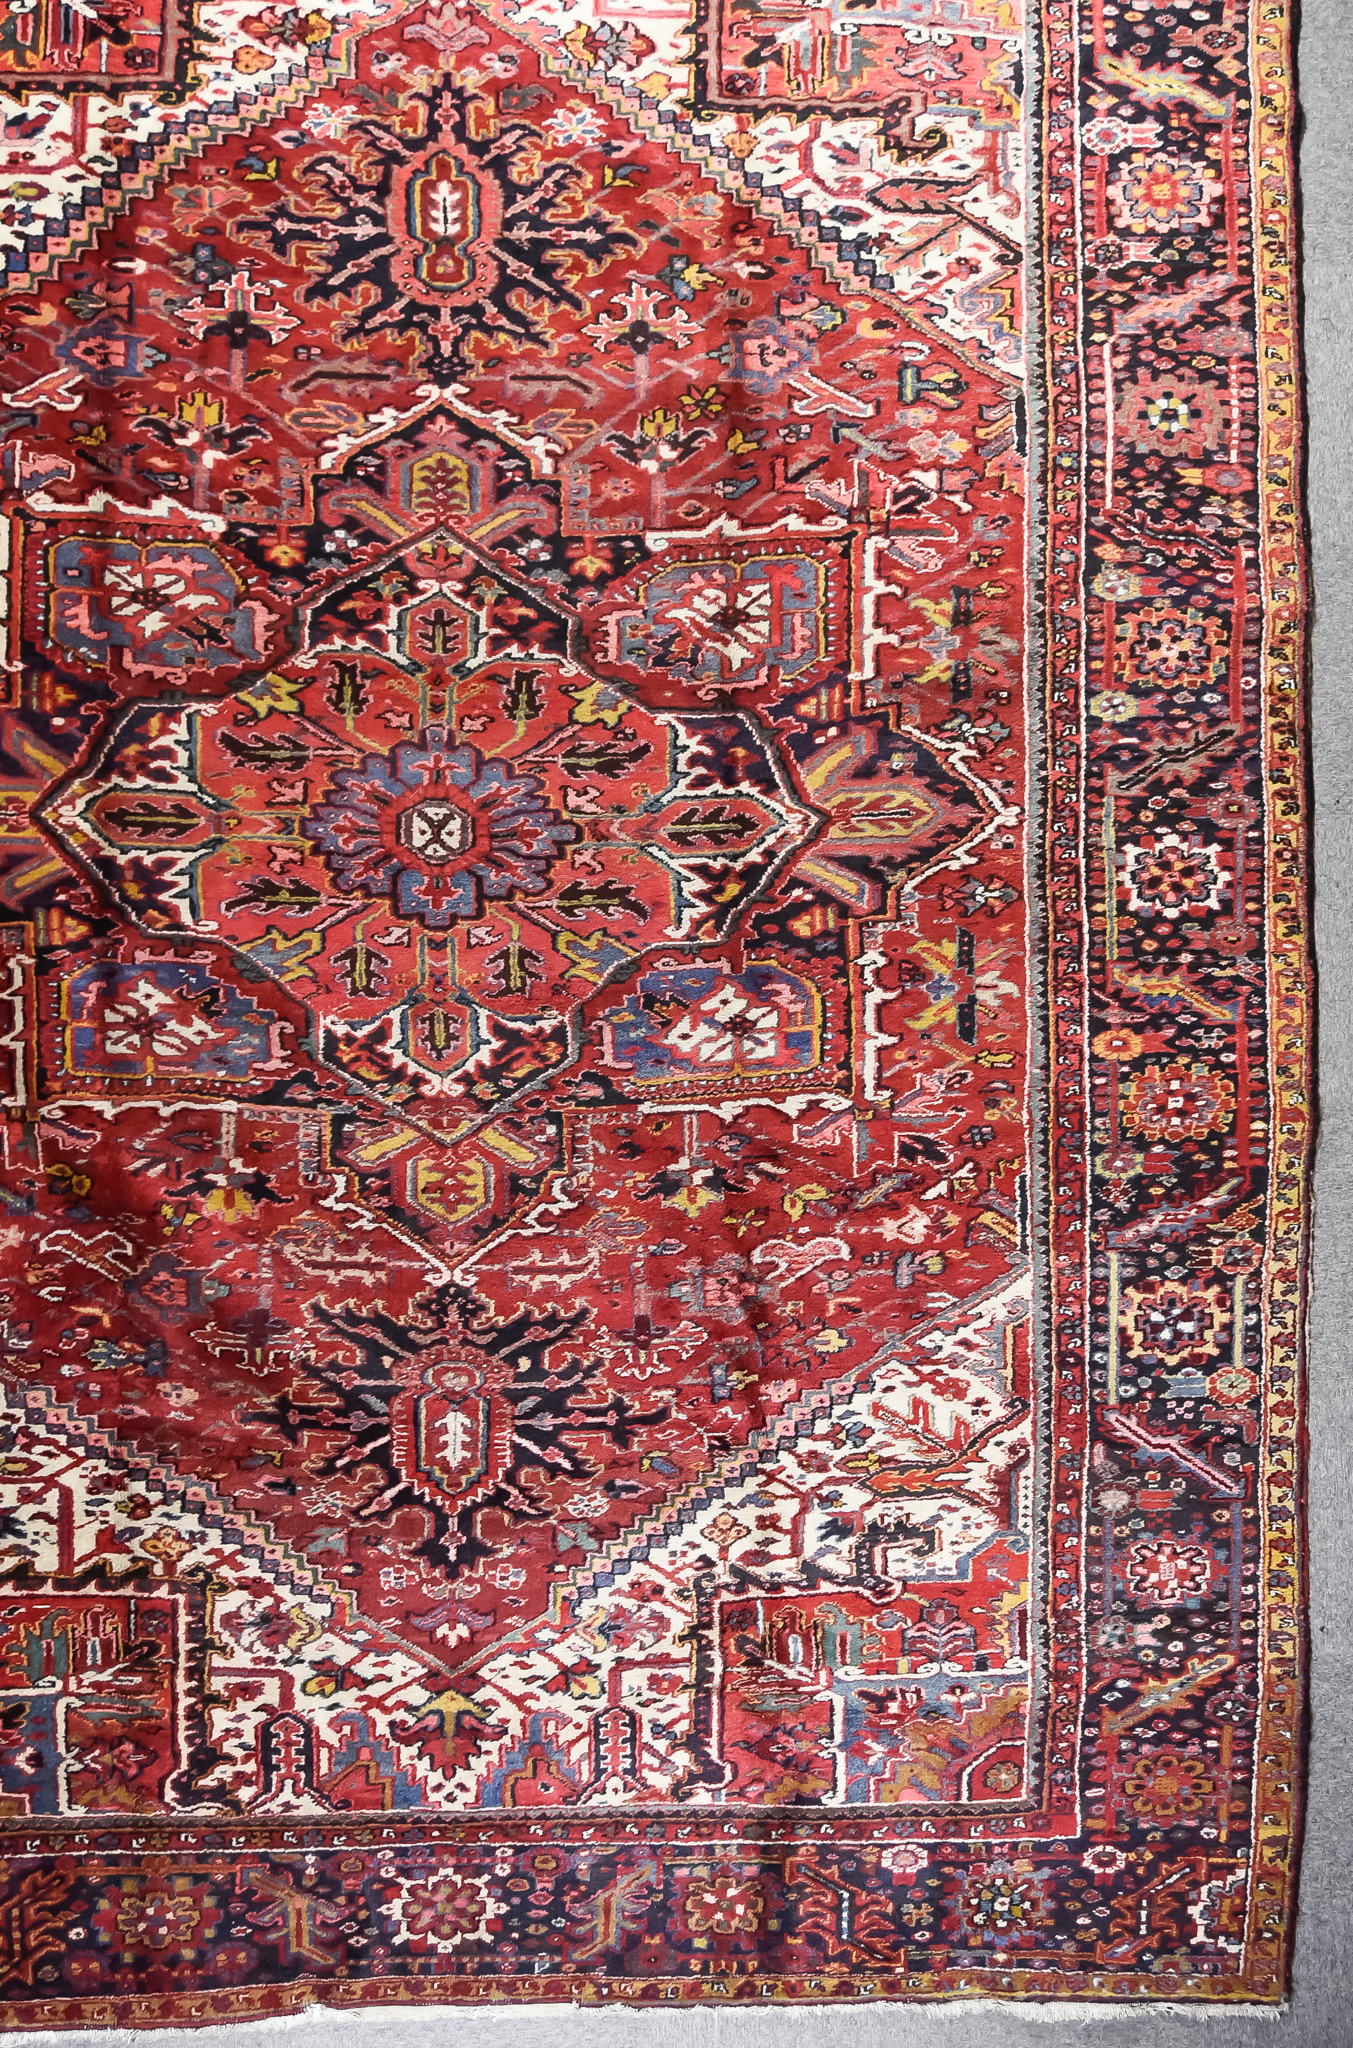 An Antique Heriz Carpet, woven in colours of ivory, navy blue and wine, with a bold central cross